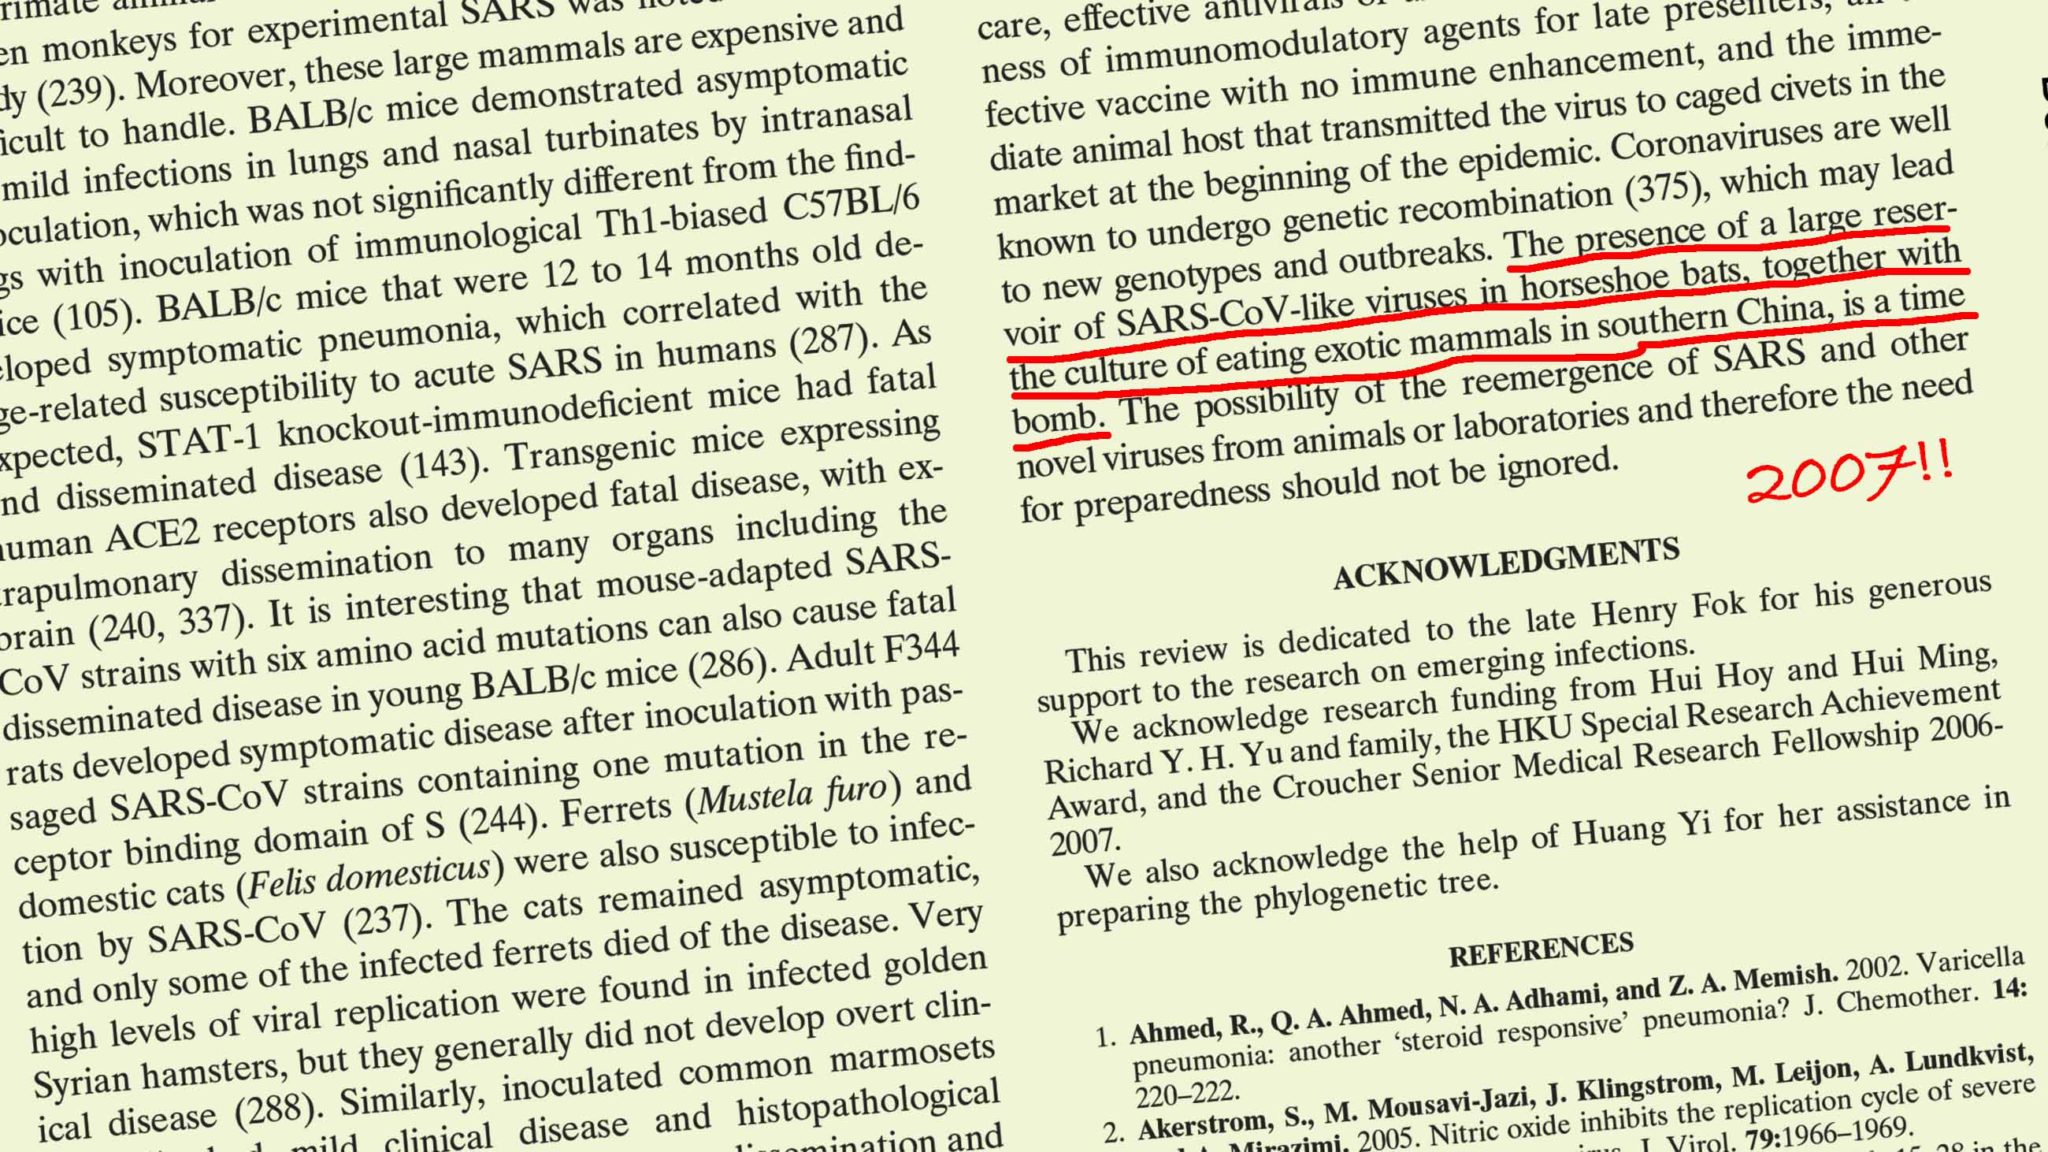 Screenshot of a 2007 paper about SARS-CoV-like viruses in bats, with some text underlined in red.